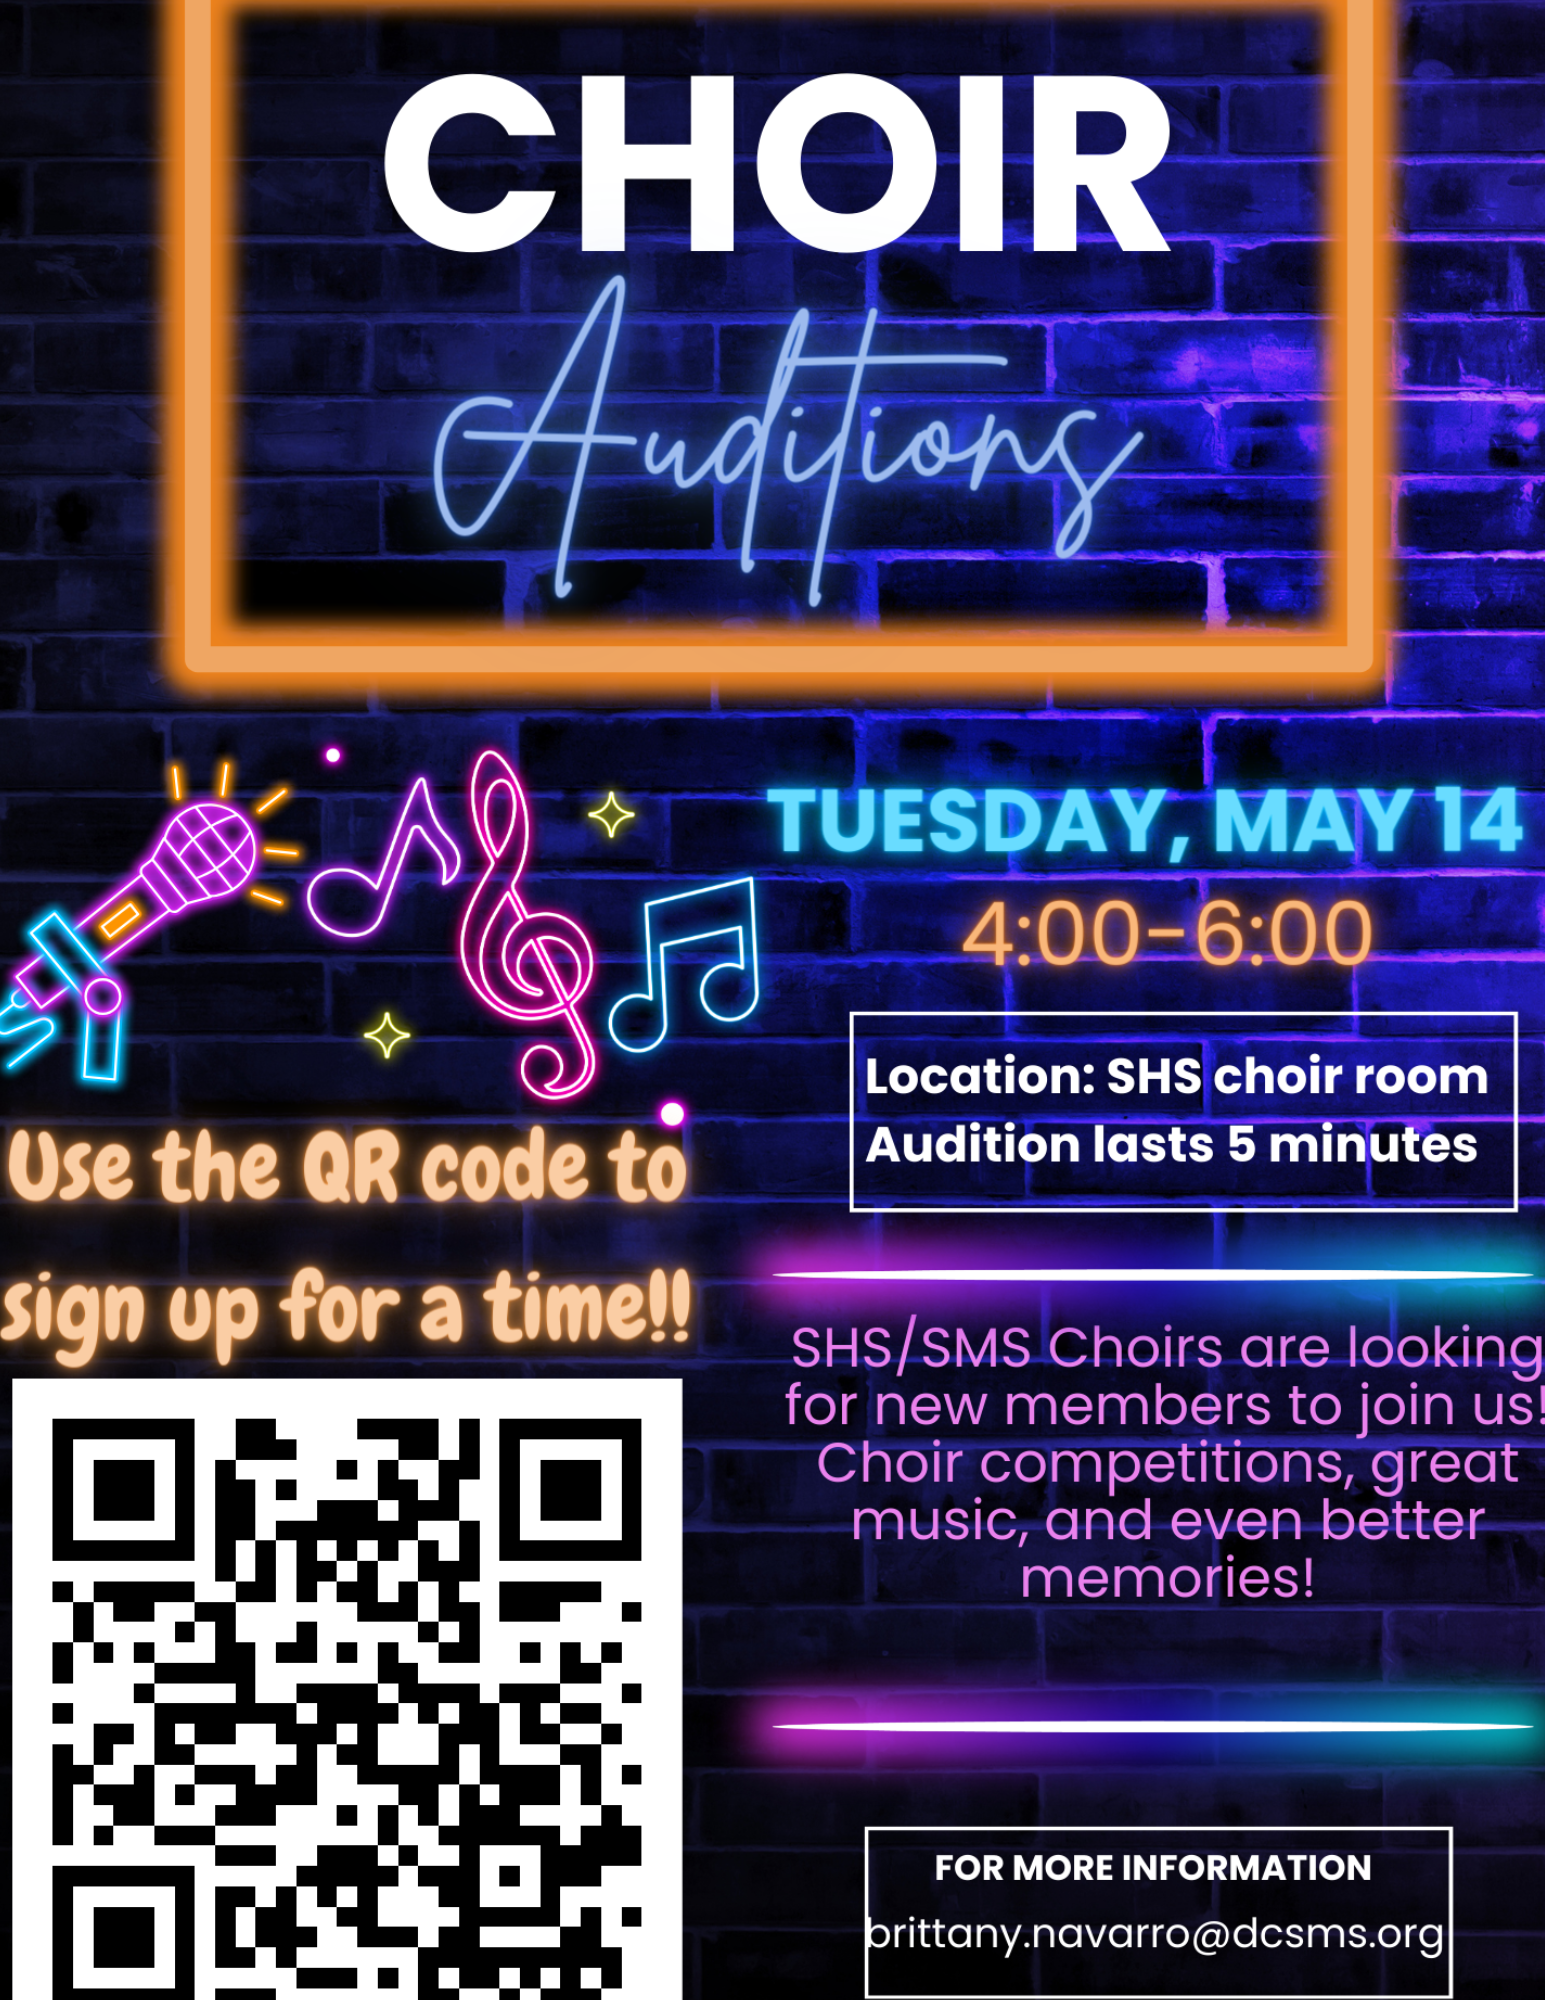 SHS will be hosting their choir auditions on May 1th from 4:00 p.m. -6:00 p.m. Auditions will in the SHS choir room and last for 5 minutes.